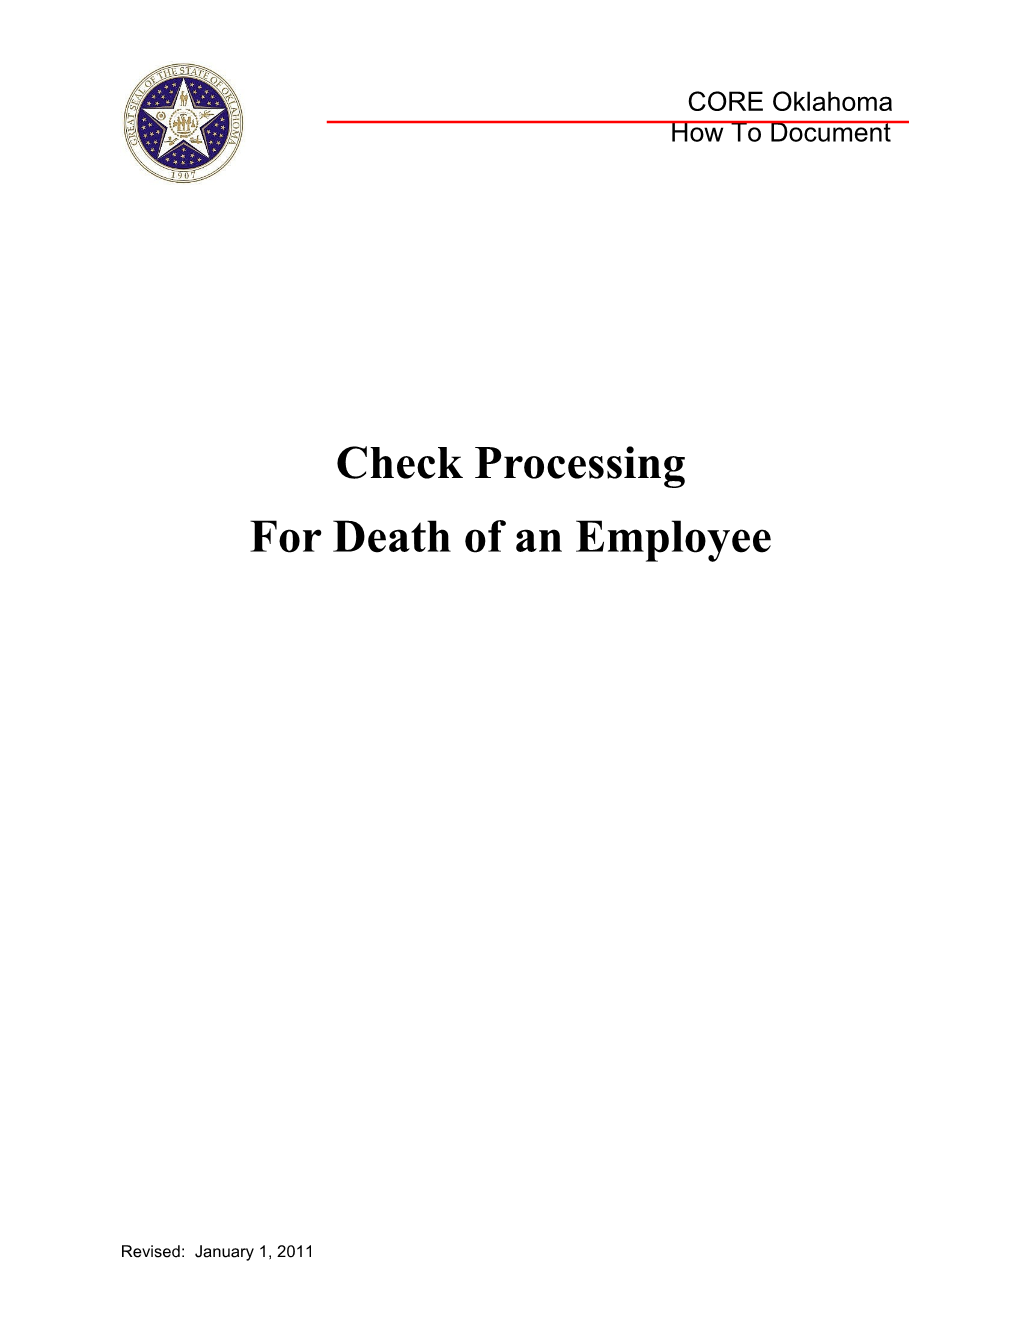 How To: Check Processing for Death of an Employee